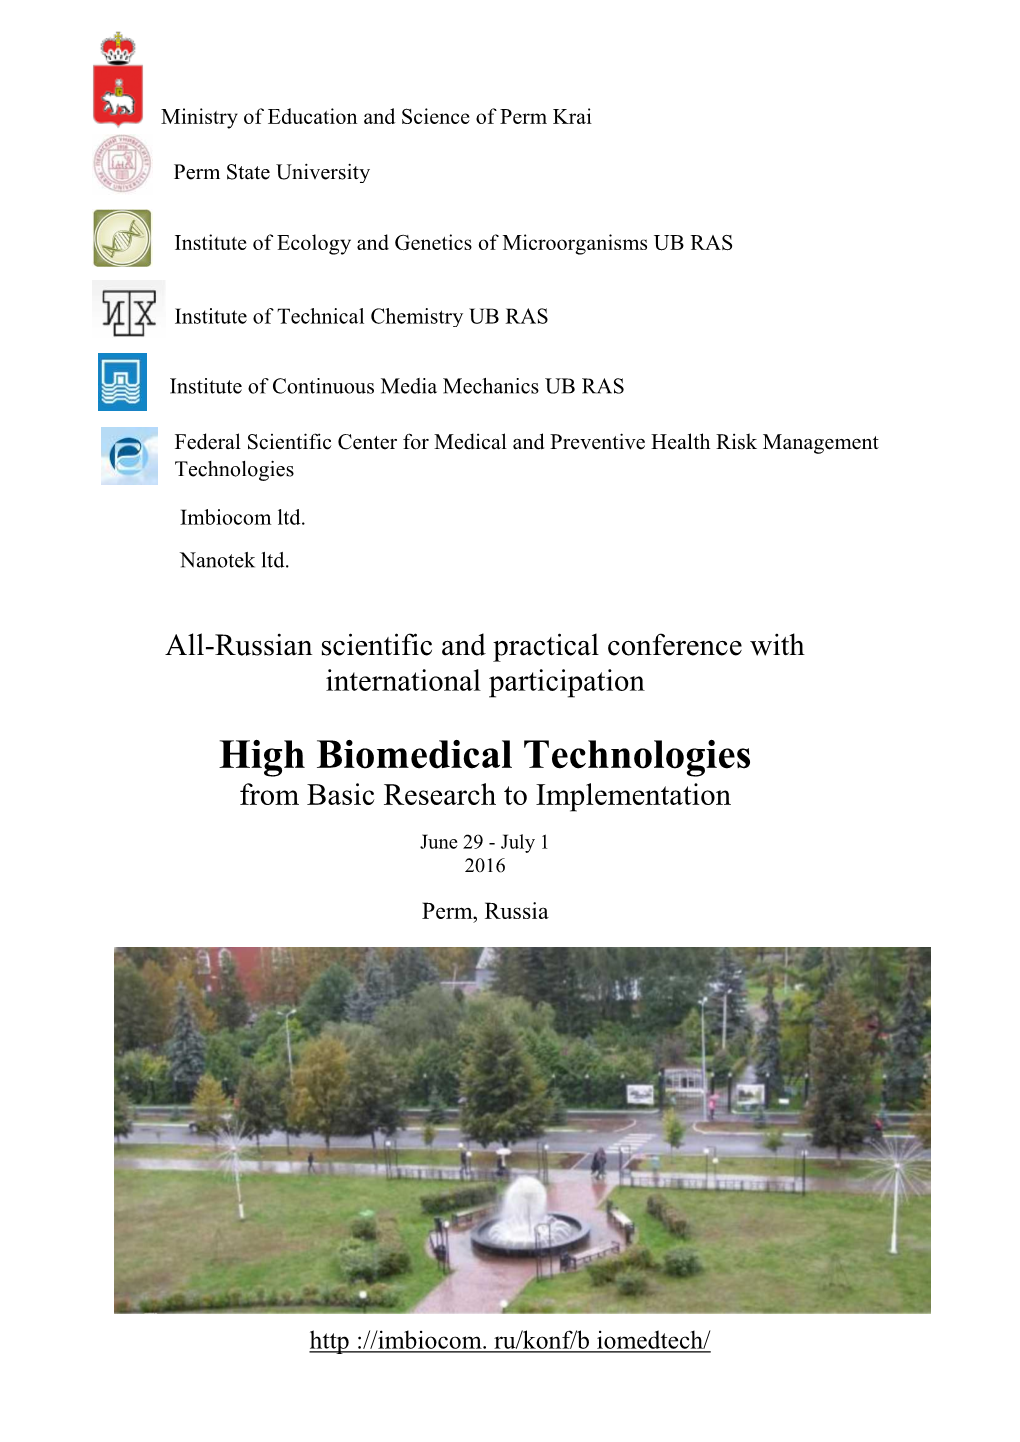 High Biomedical Technologies from Basic Research to Implementation